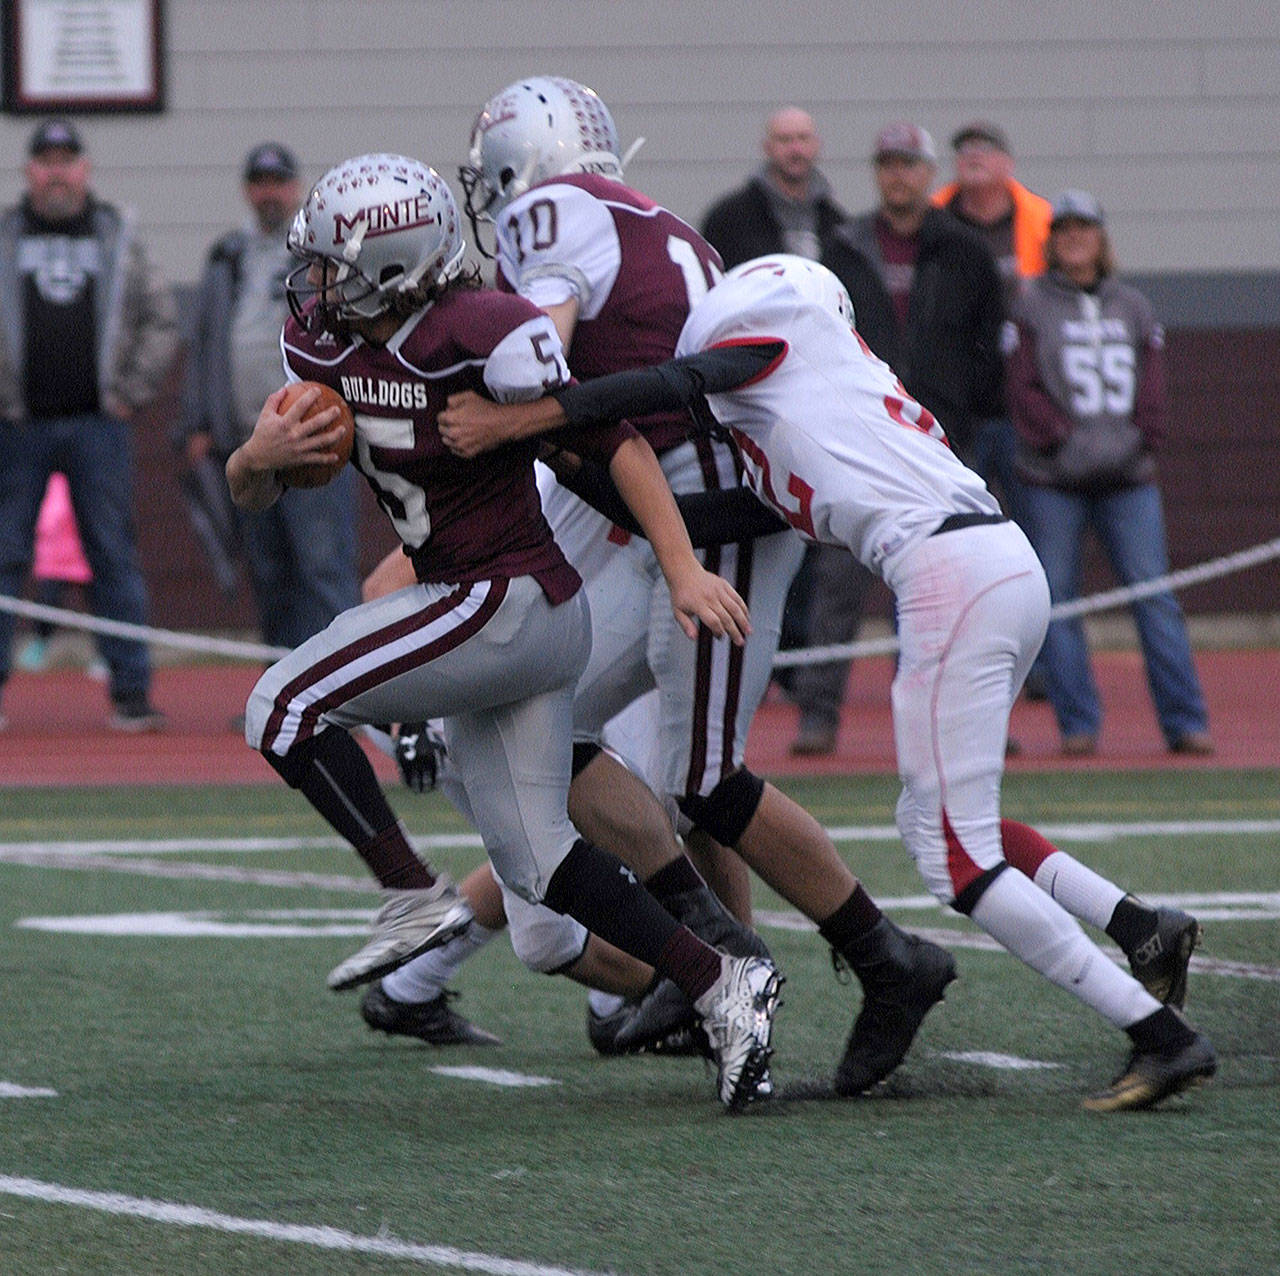 Montesano’s Teegan Zillyet pulls away from tackler as he returns the opening kickoff 90 yards for a TD in Friday’s 24-14 win over Columbia-White Salmon. (Hasani Grayson | The Daily World)